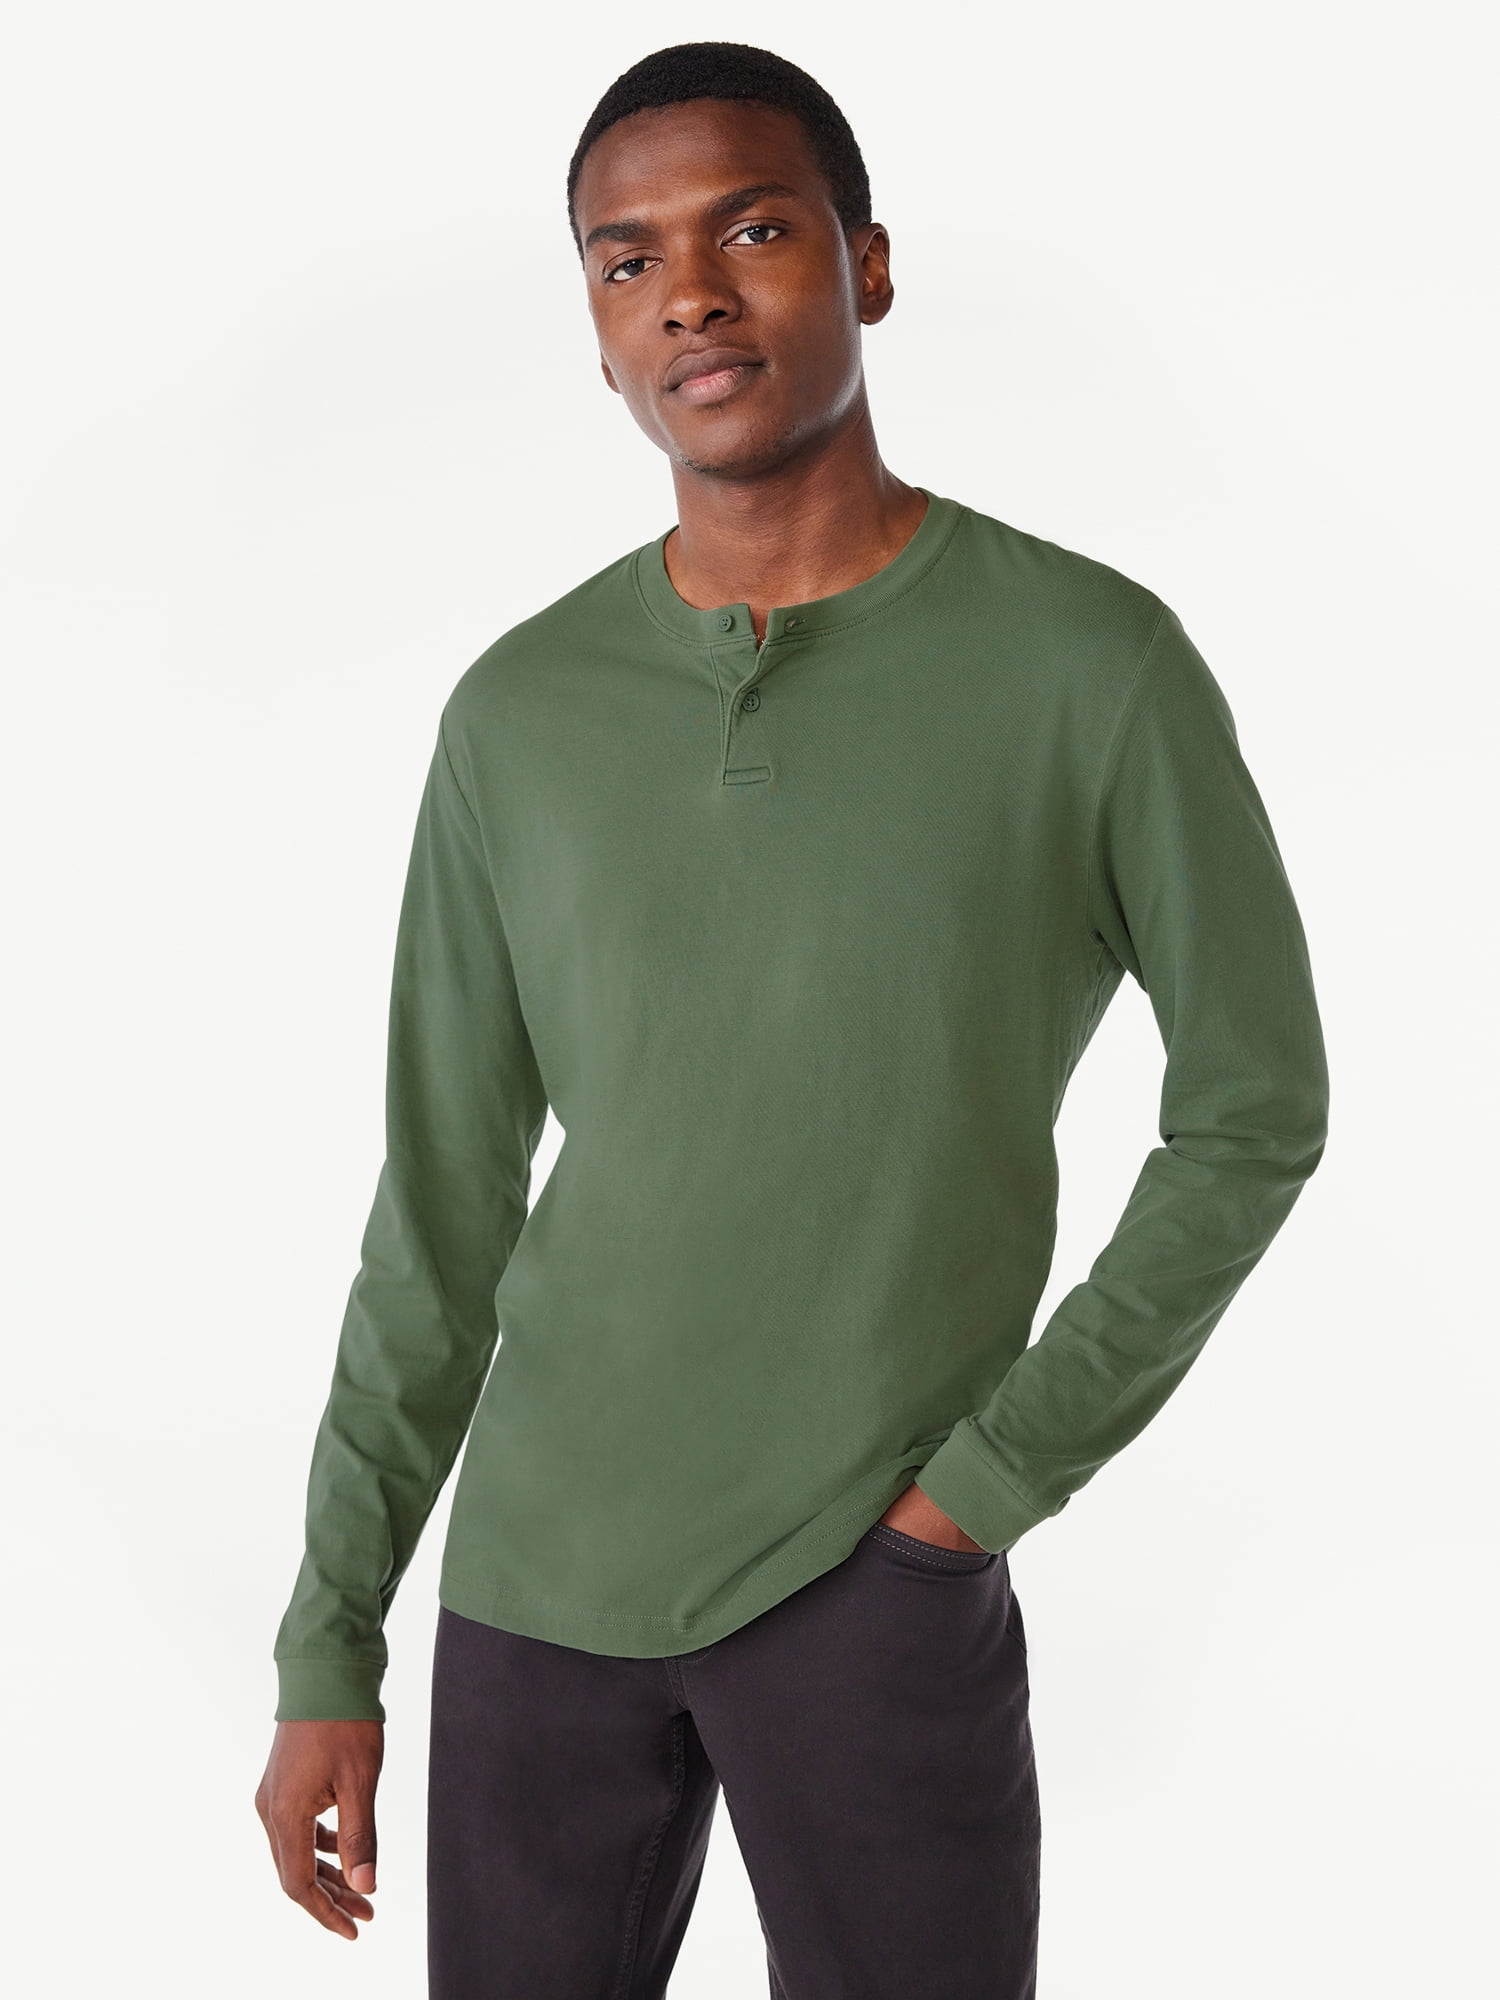 Free Assembly Men's Garment Dye Henley Shirt with Long Sleeves, Sizes ...